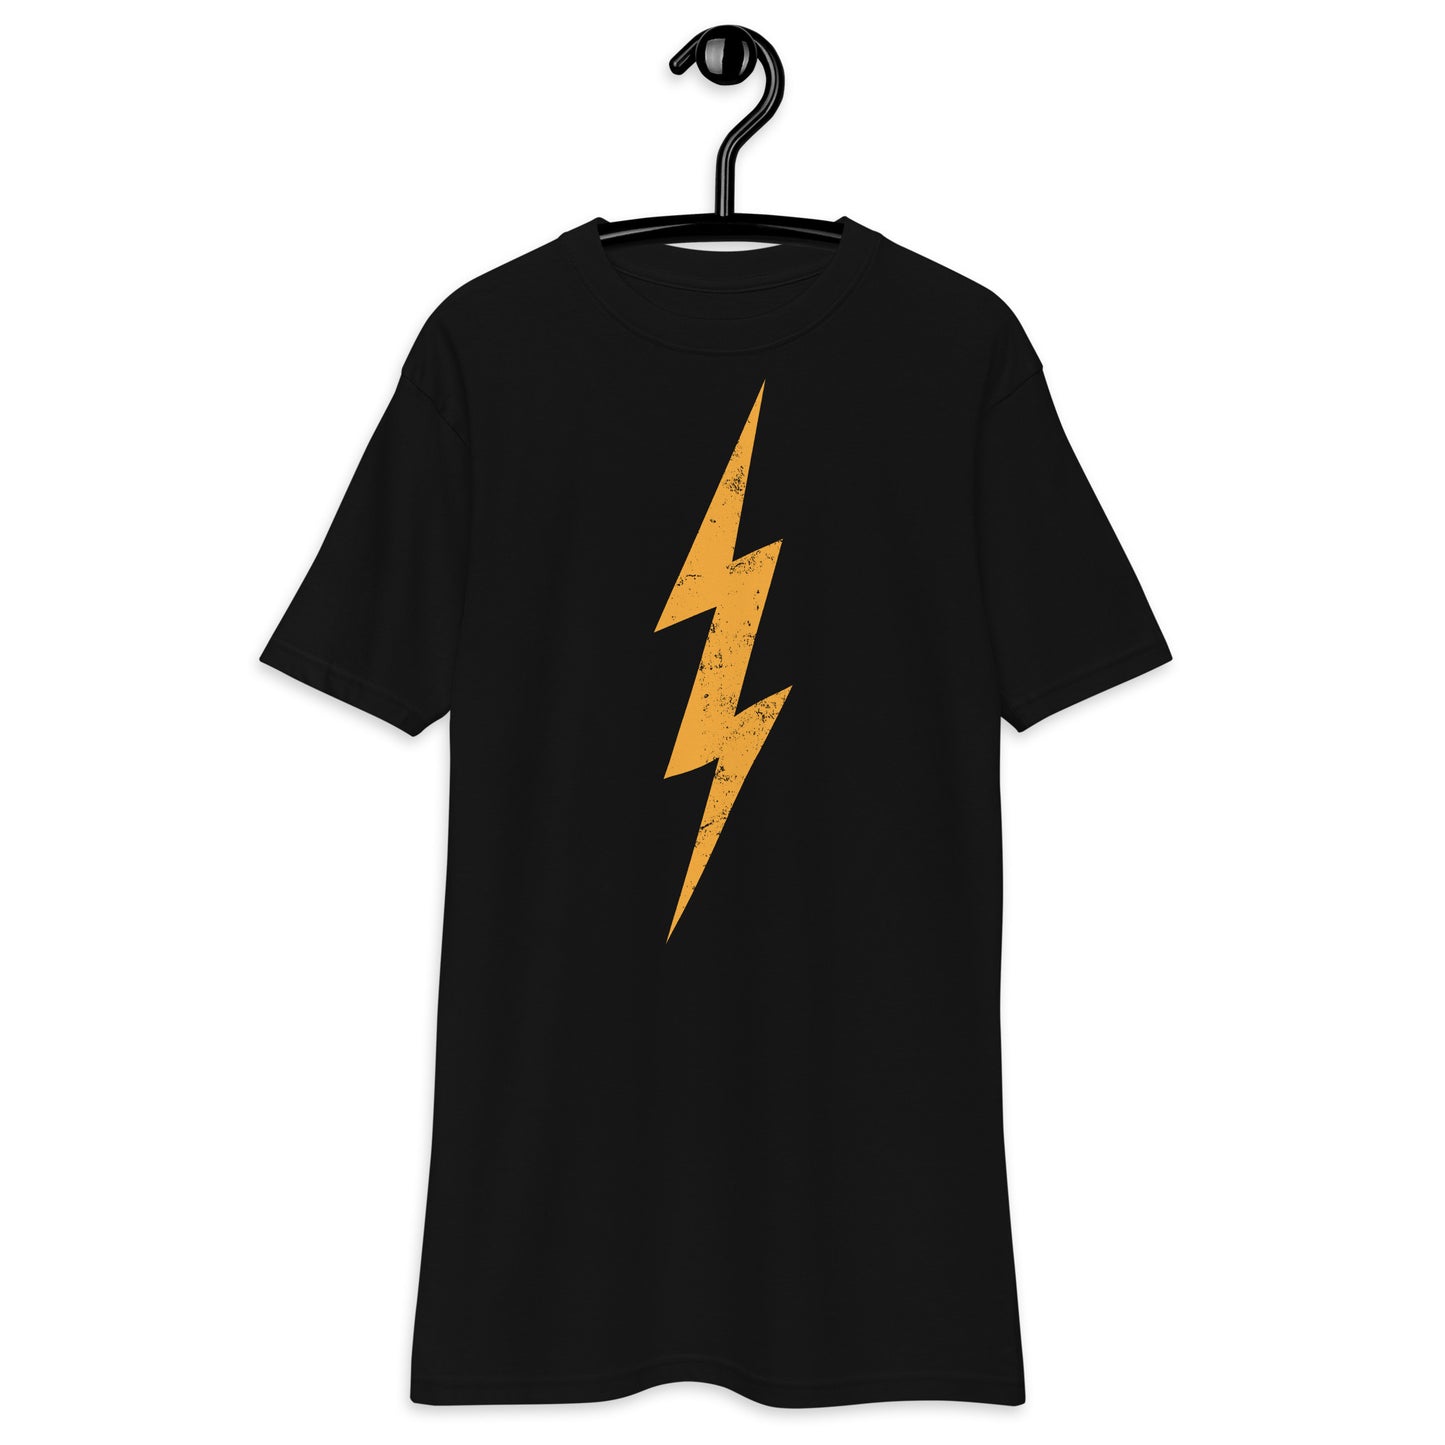 Detailed view of the distressed lightning bolt graphic on black T-shirt.